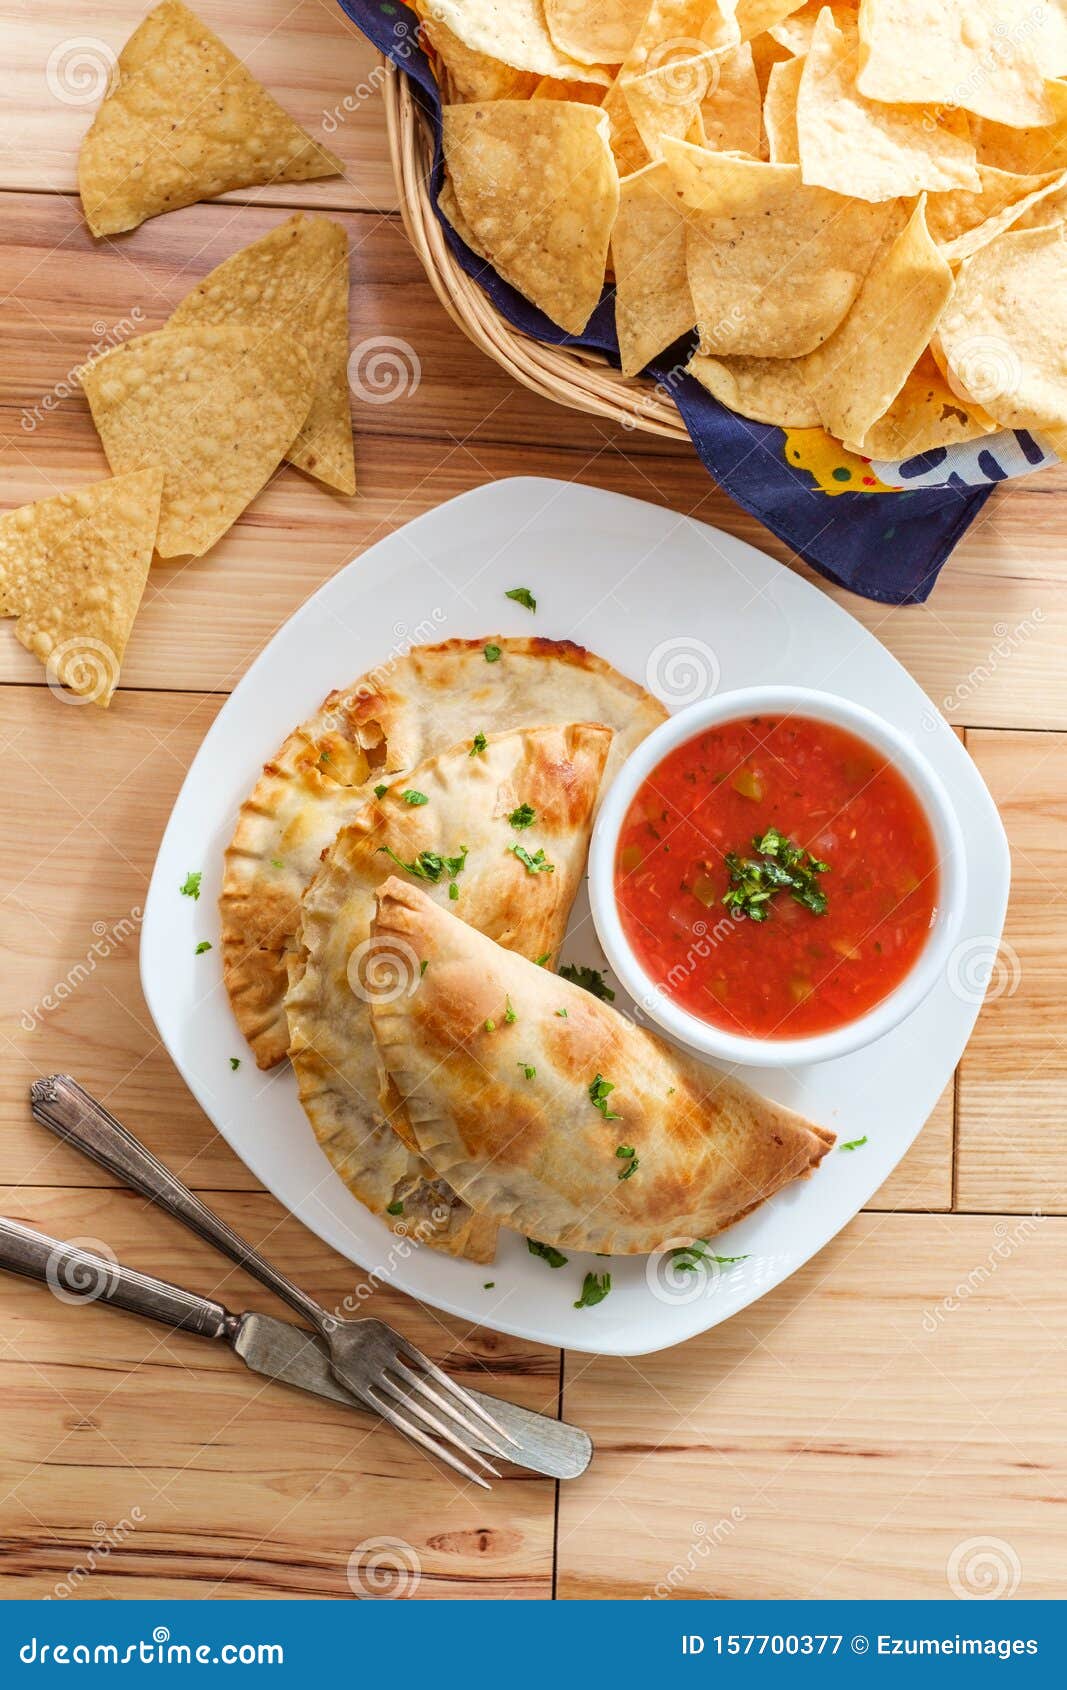 Mexican Beef Empanadas stock image. Image of snack, style - 157700377